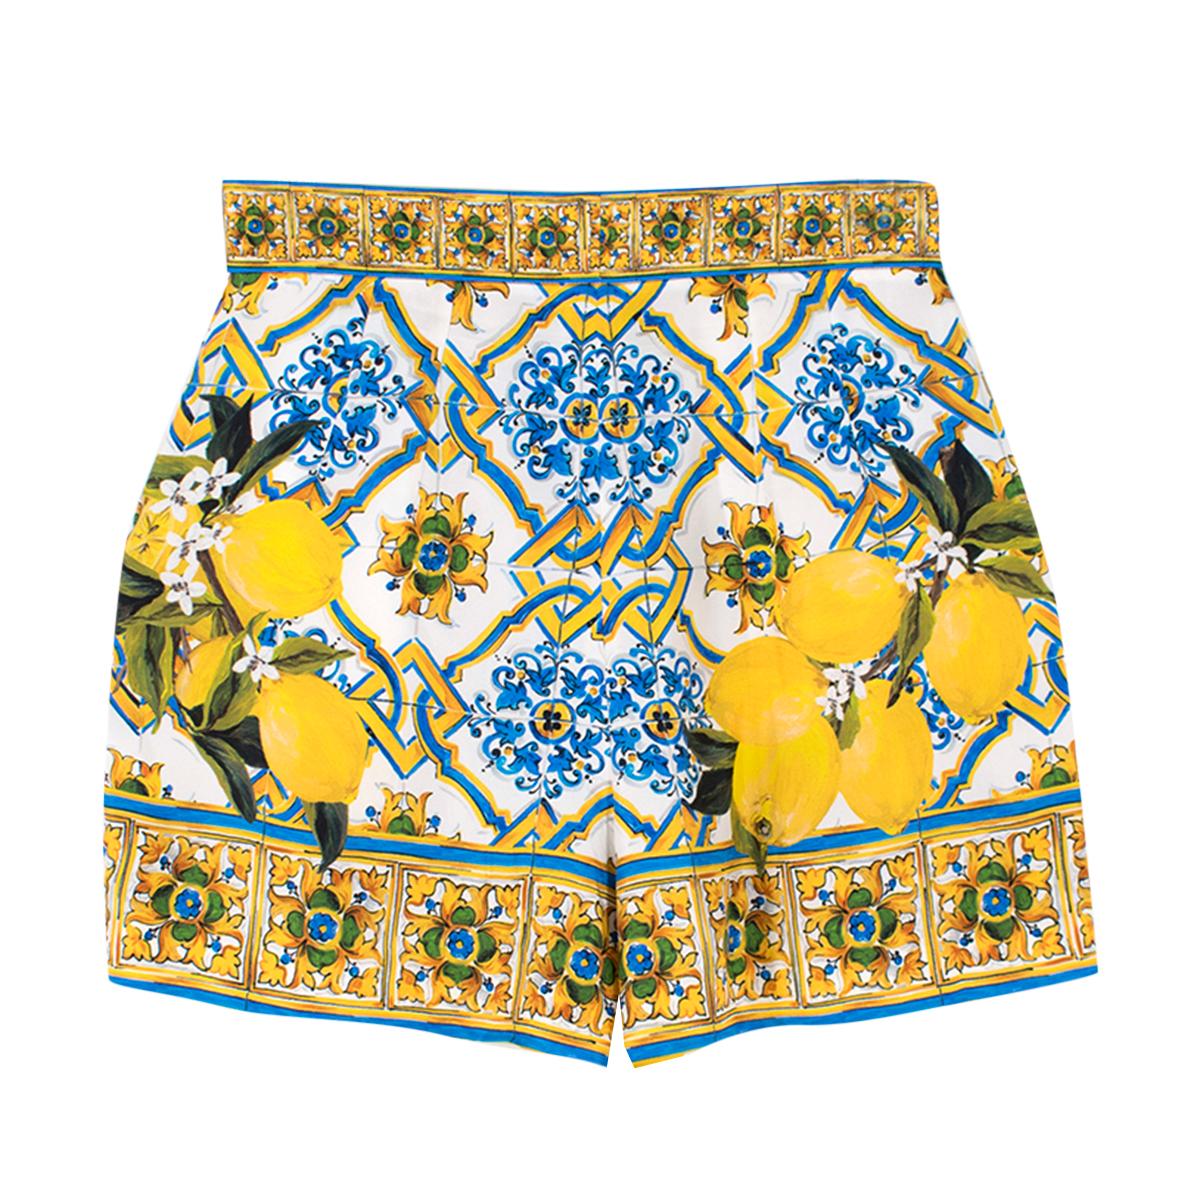 Dolce & Gabbana Majolica & Lemon-print Silk Shorts

- Multi-coloured silk shorts
- Lightweight
- Majolica and lemon-print
- High-rise waist
- Centre-front button and concealed zip fastening
- Front side pockets

Please note, these items are